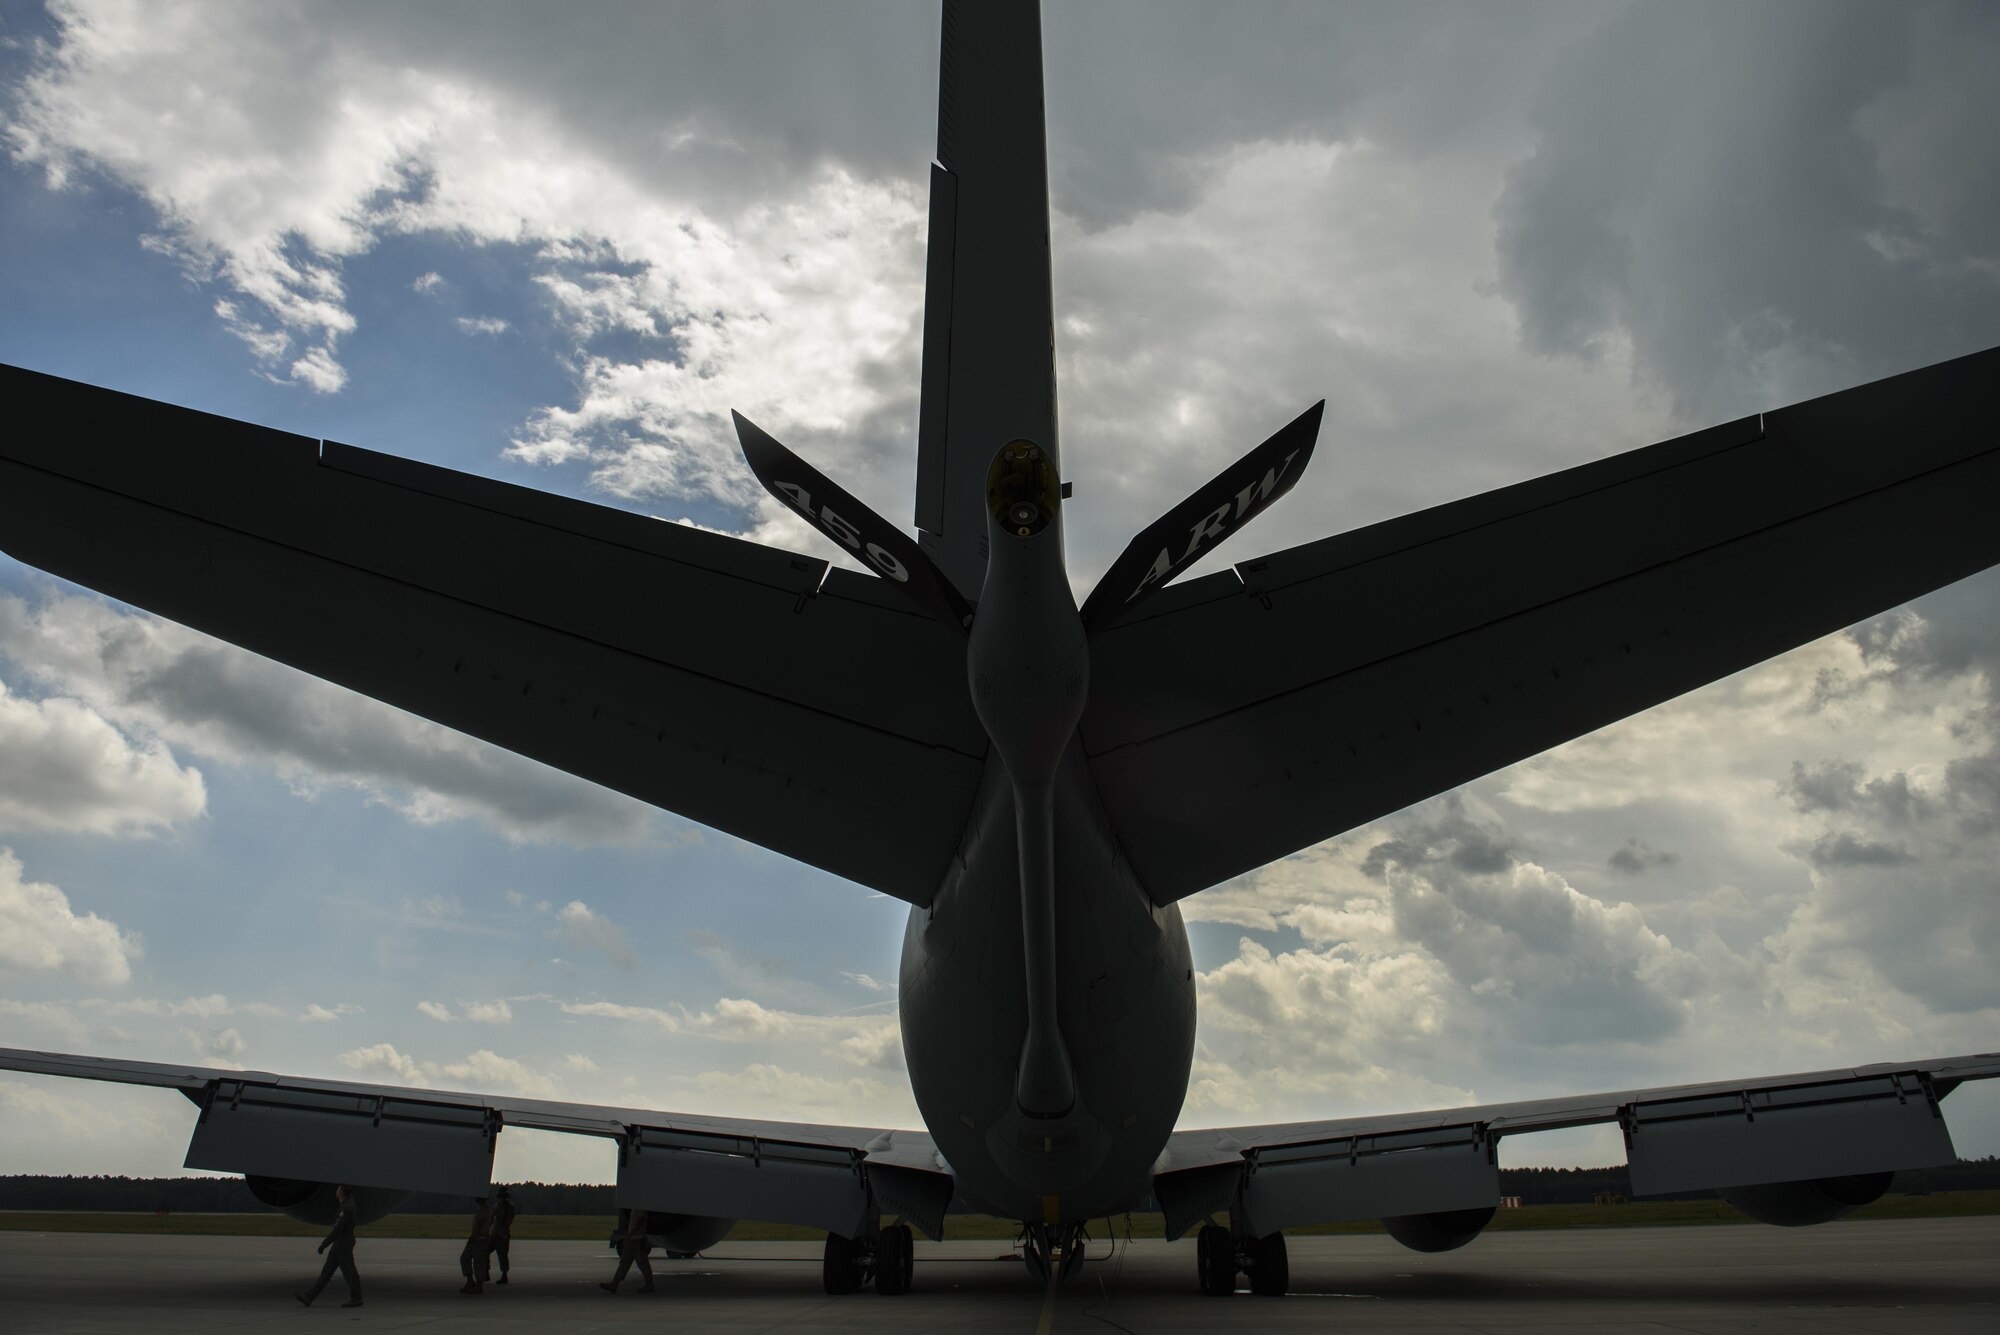 Capt. Cody Jordan, left, 351st Air Refueling Squadron pilot, conducts a pre-flight inspection on a KC-135R Stratotanker during BALTOPS exercise at Powidz Air Base, Poland, June 12, 2017. The exercise is designed to enhance flexibility and interoperability, to strengthen combined response capabilities, as well as demonstrate resolve among Allied and Partner Nations' forces to ensure stability in, and if necessary defend, the Baltic Sea region. (U.S. Air Force photo by Staff Sgt. Jonathan Snyder)